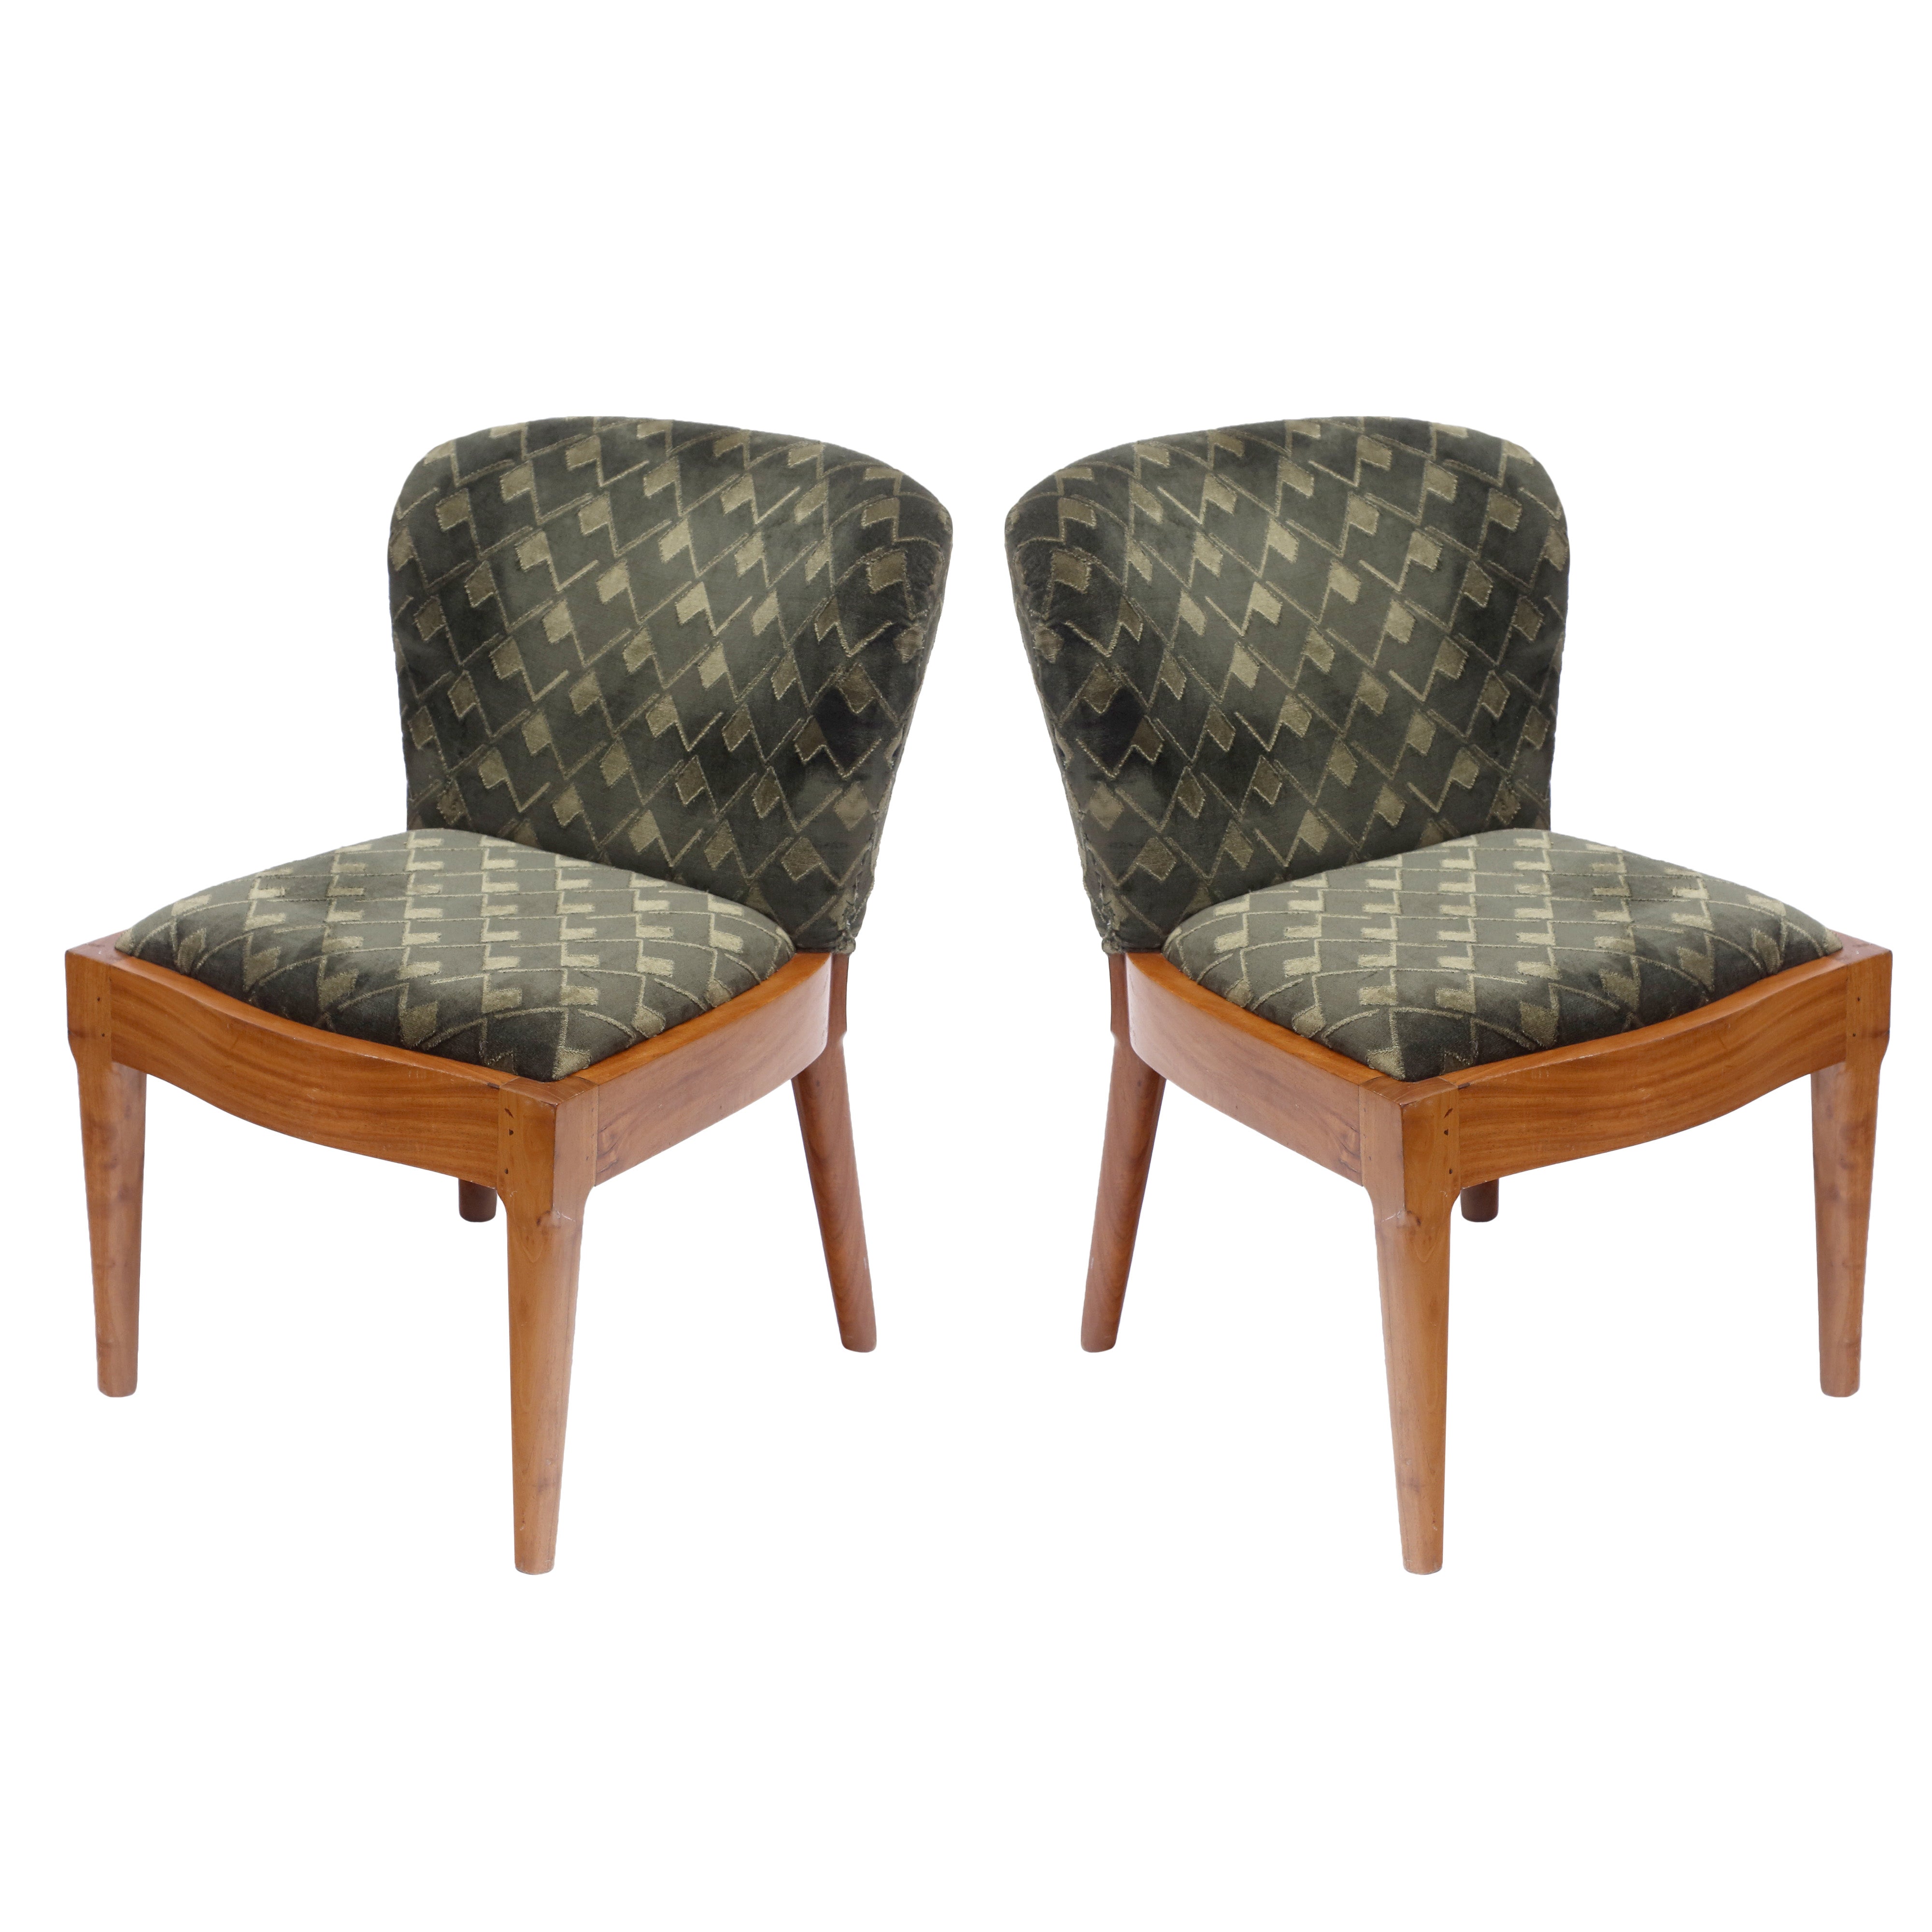 (Set of 2) Wooden Upholstered Curved back wide Dining Chair Dining Chair